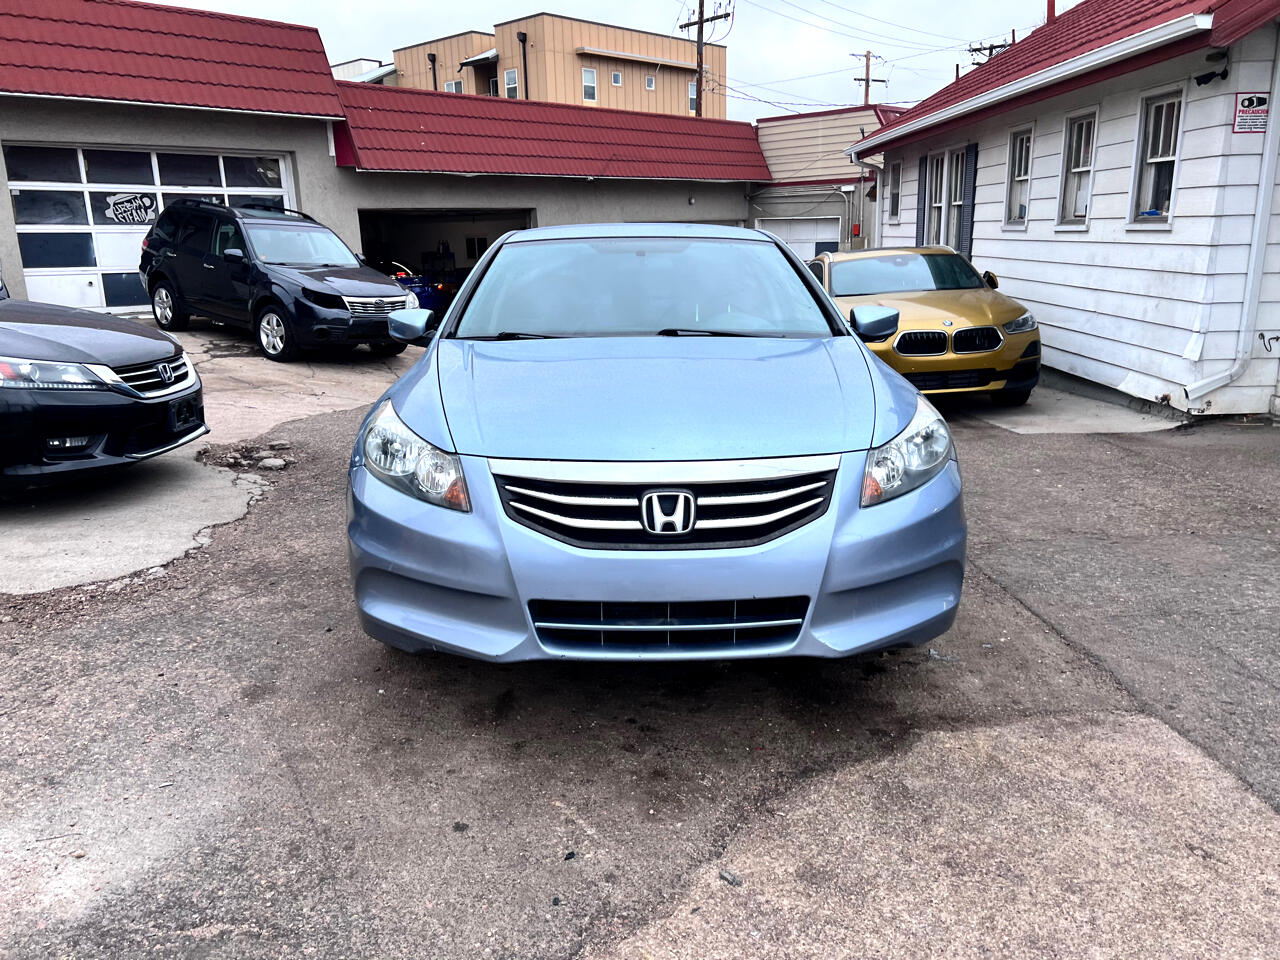 Used 2011 Honda Accord LX with VIN 1HGCP2F32BA025809 for sale in Denver, CO